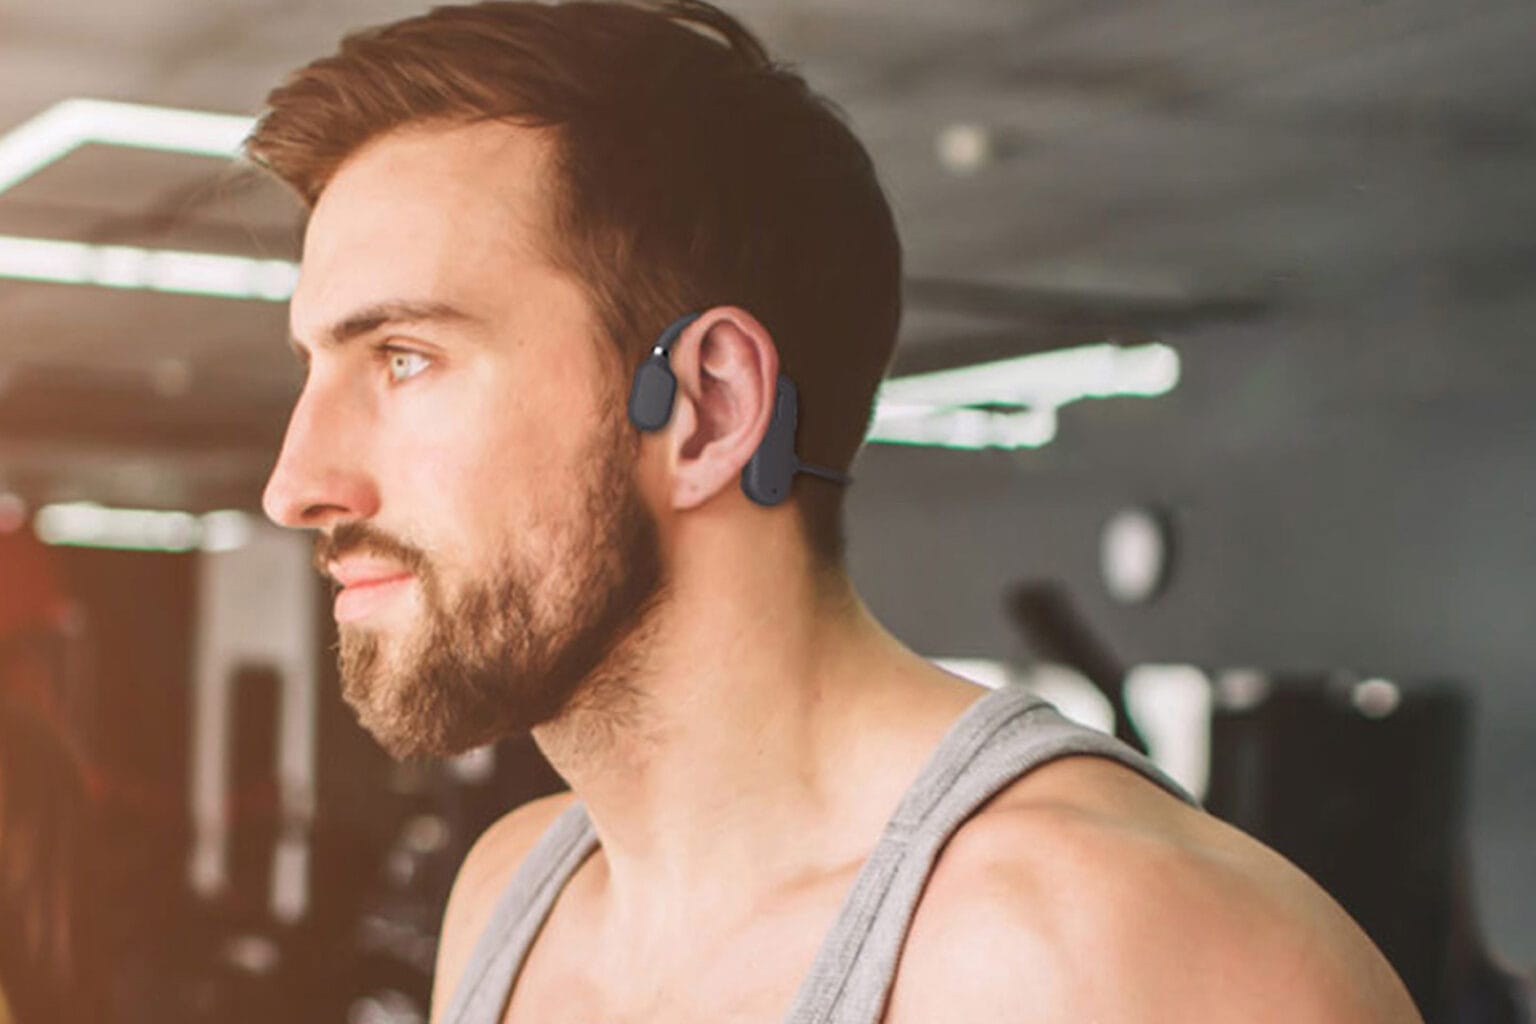 Listen safely almost anywhere with these $34 open ear headphones.